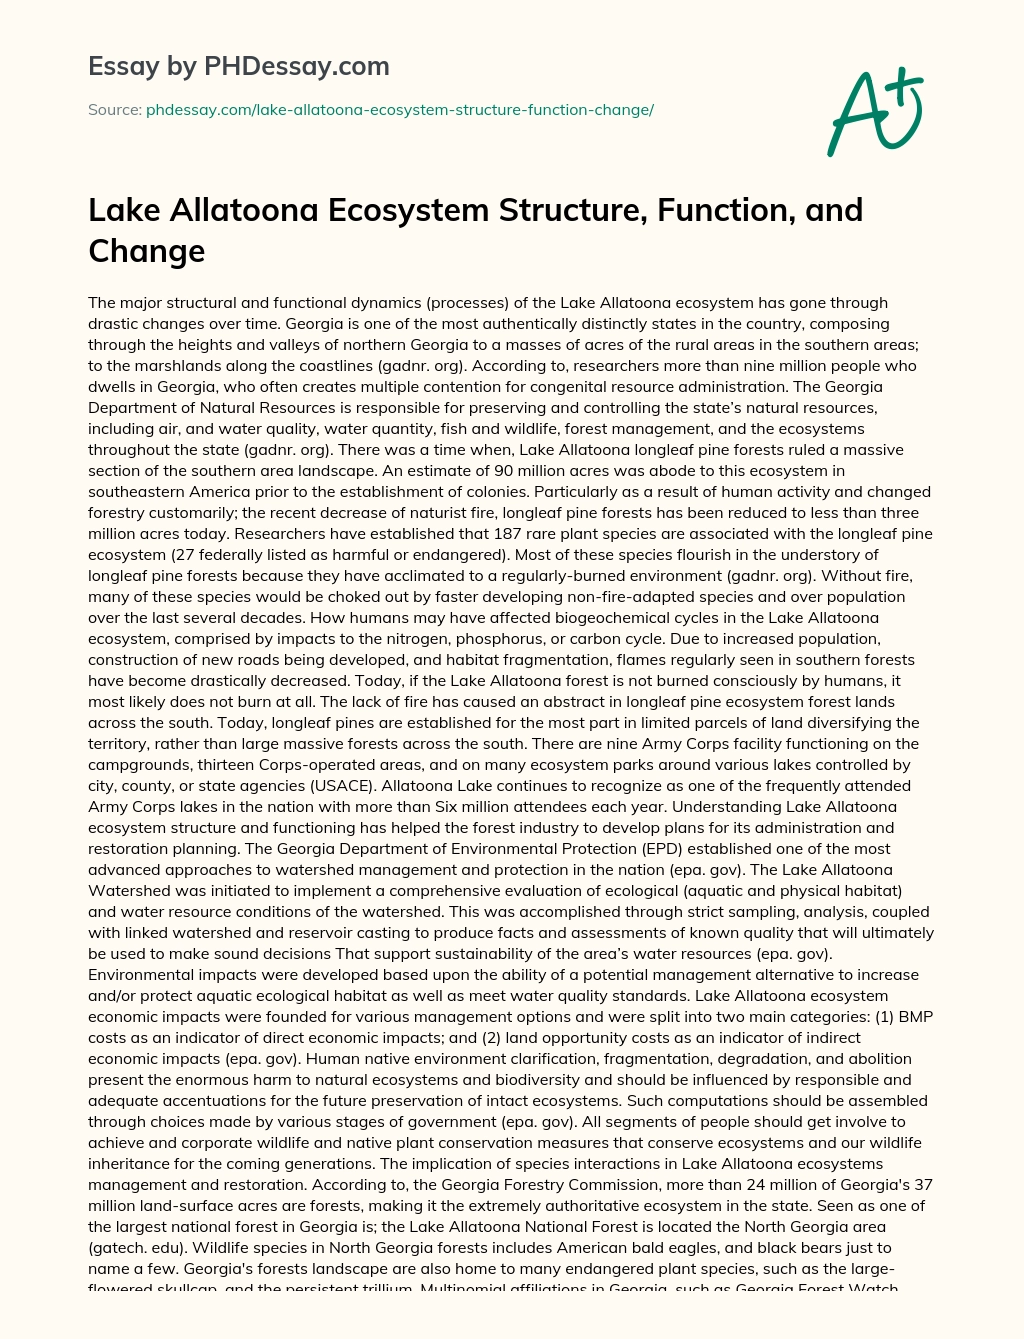 Lake Allatoona Ecosystem Structure, Function, and Change essay